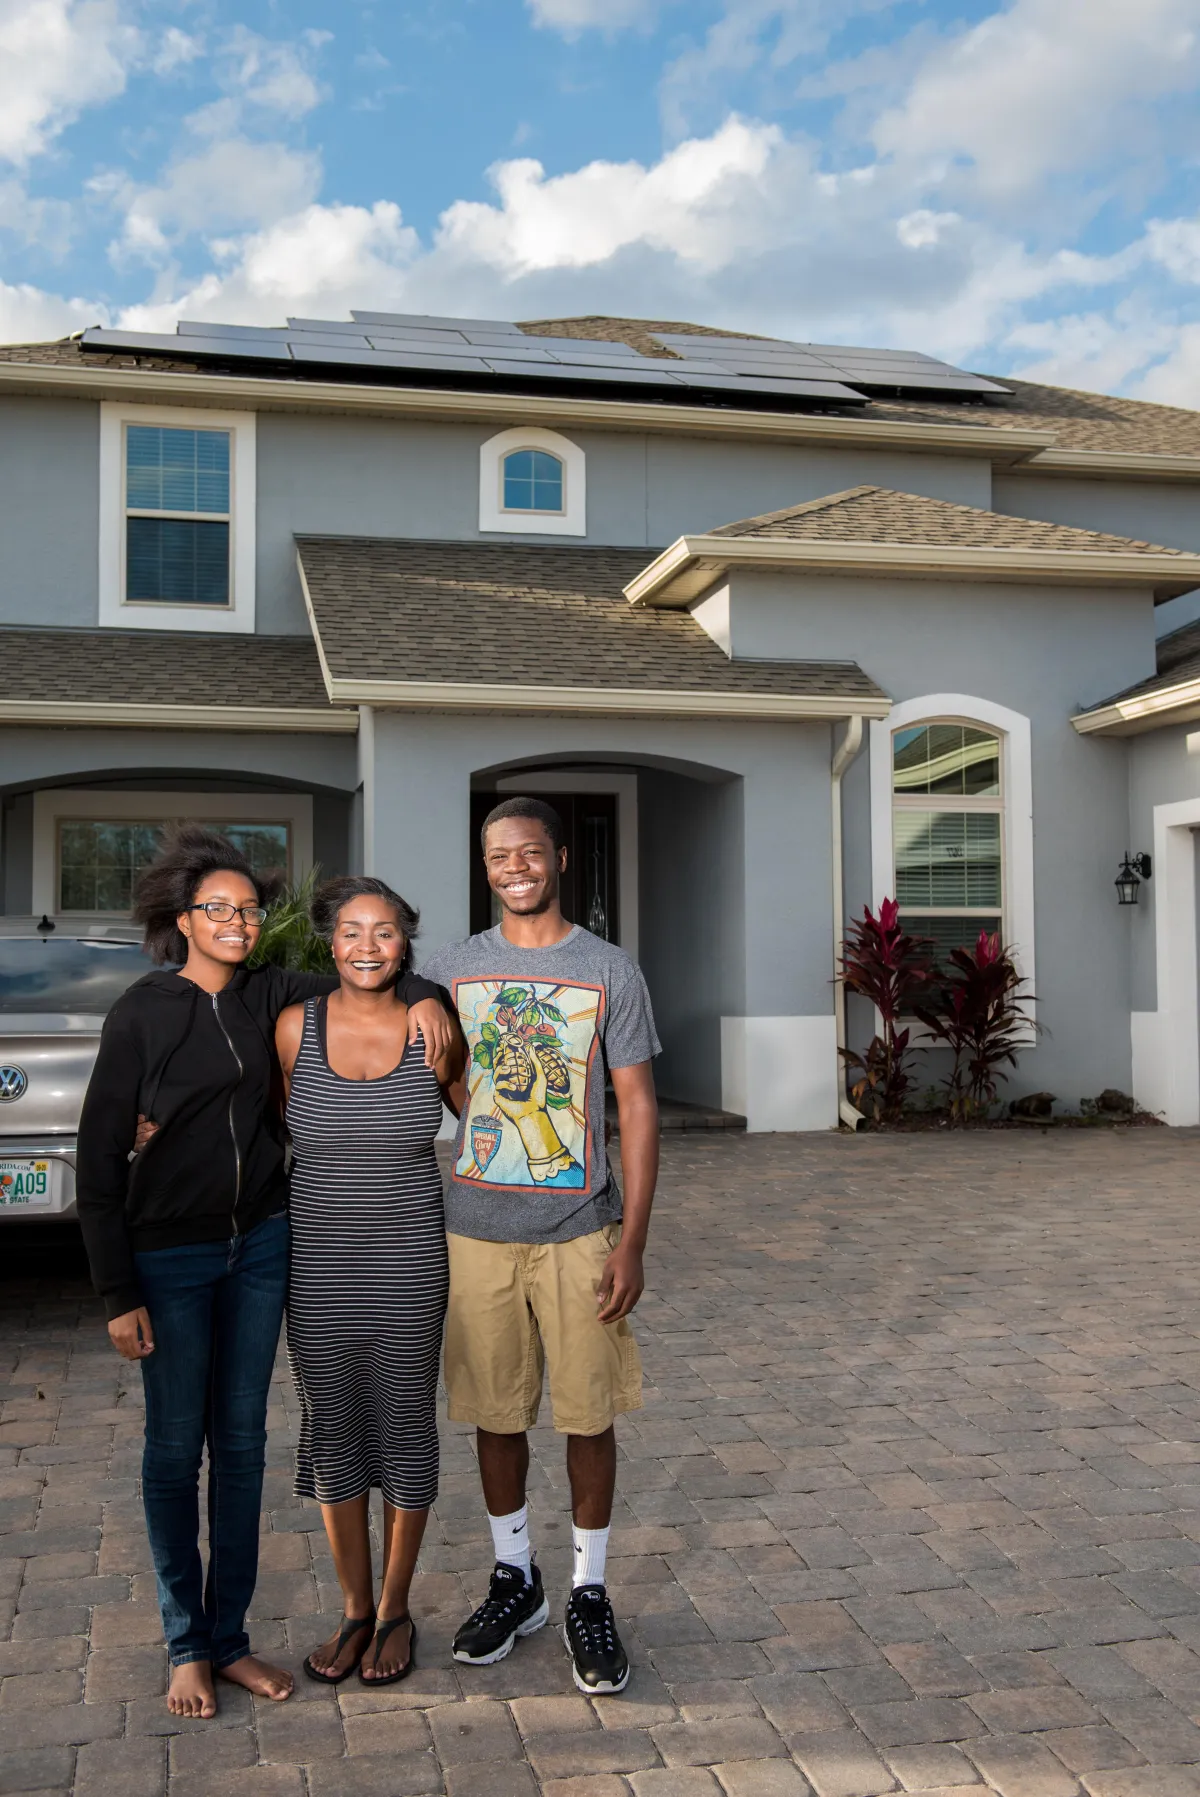 A joyful family stands proudly in front of their home, showcasing their brand new solar panels glistening under the sun. With beaming smiles, they embrace the benefits of solar power and their commitment to a sustainable future. The recently installed solar panels symbolize their shift towards clean energy, reducing their carbon footprint while enjoying energy savings. Witness the happiness and eco-consciousness of this family as they harness the power of the sun with their newly installed solar panels.